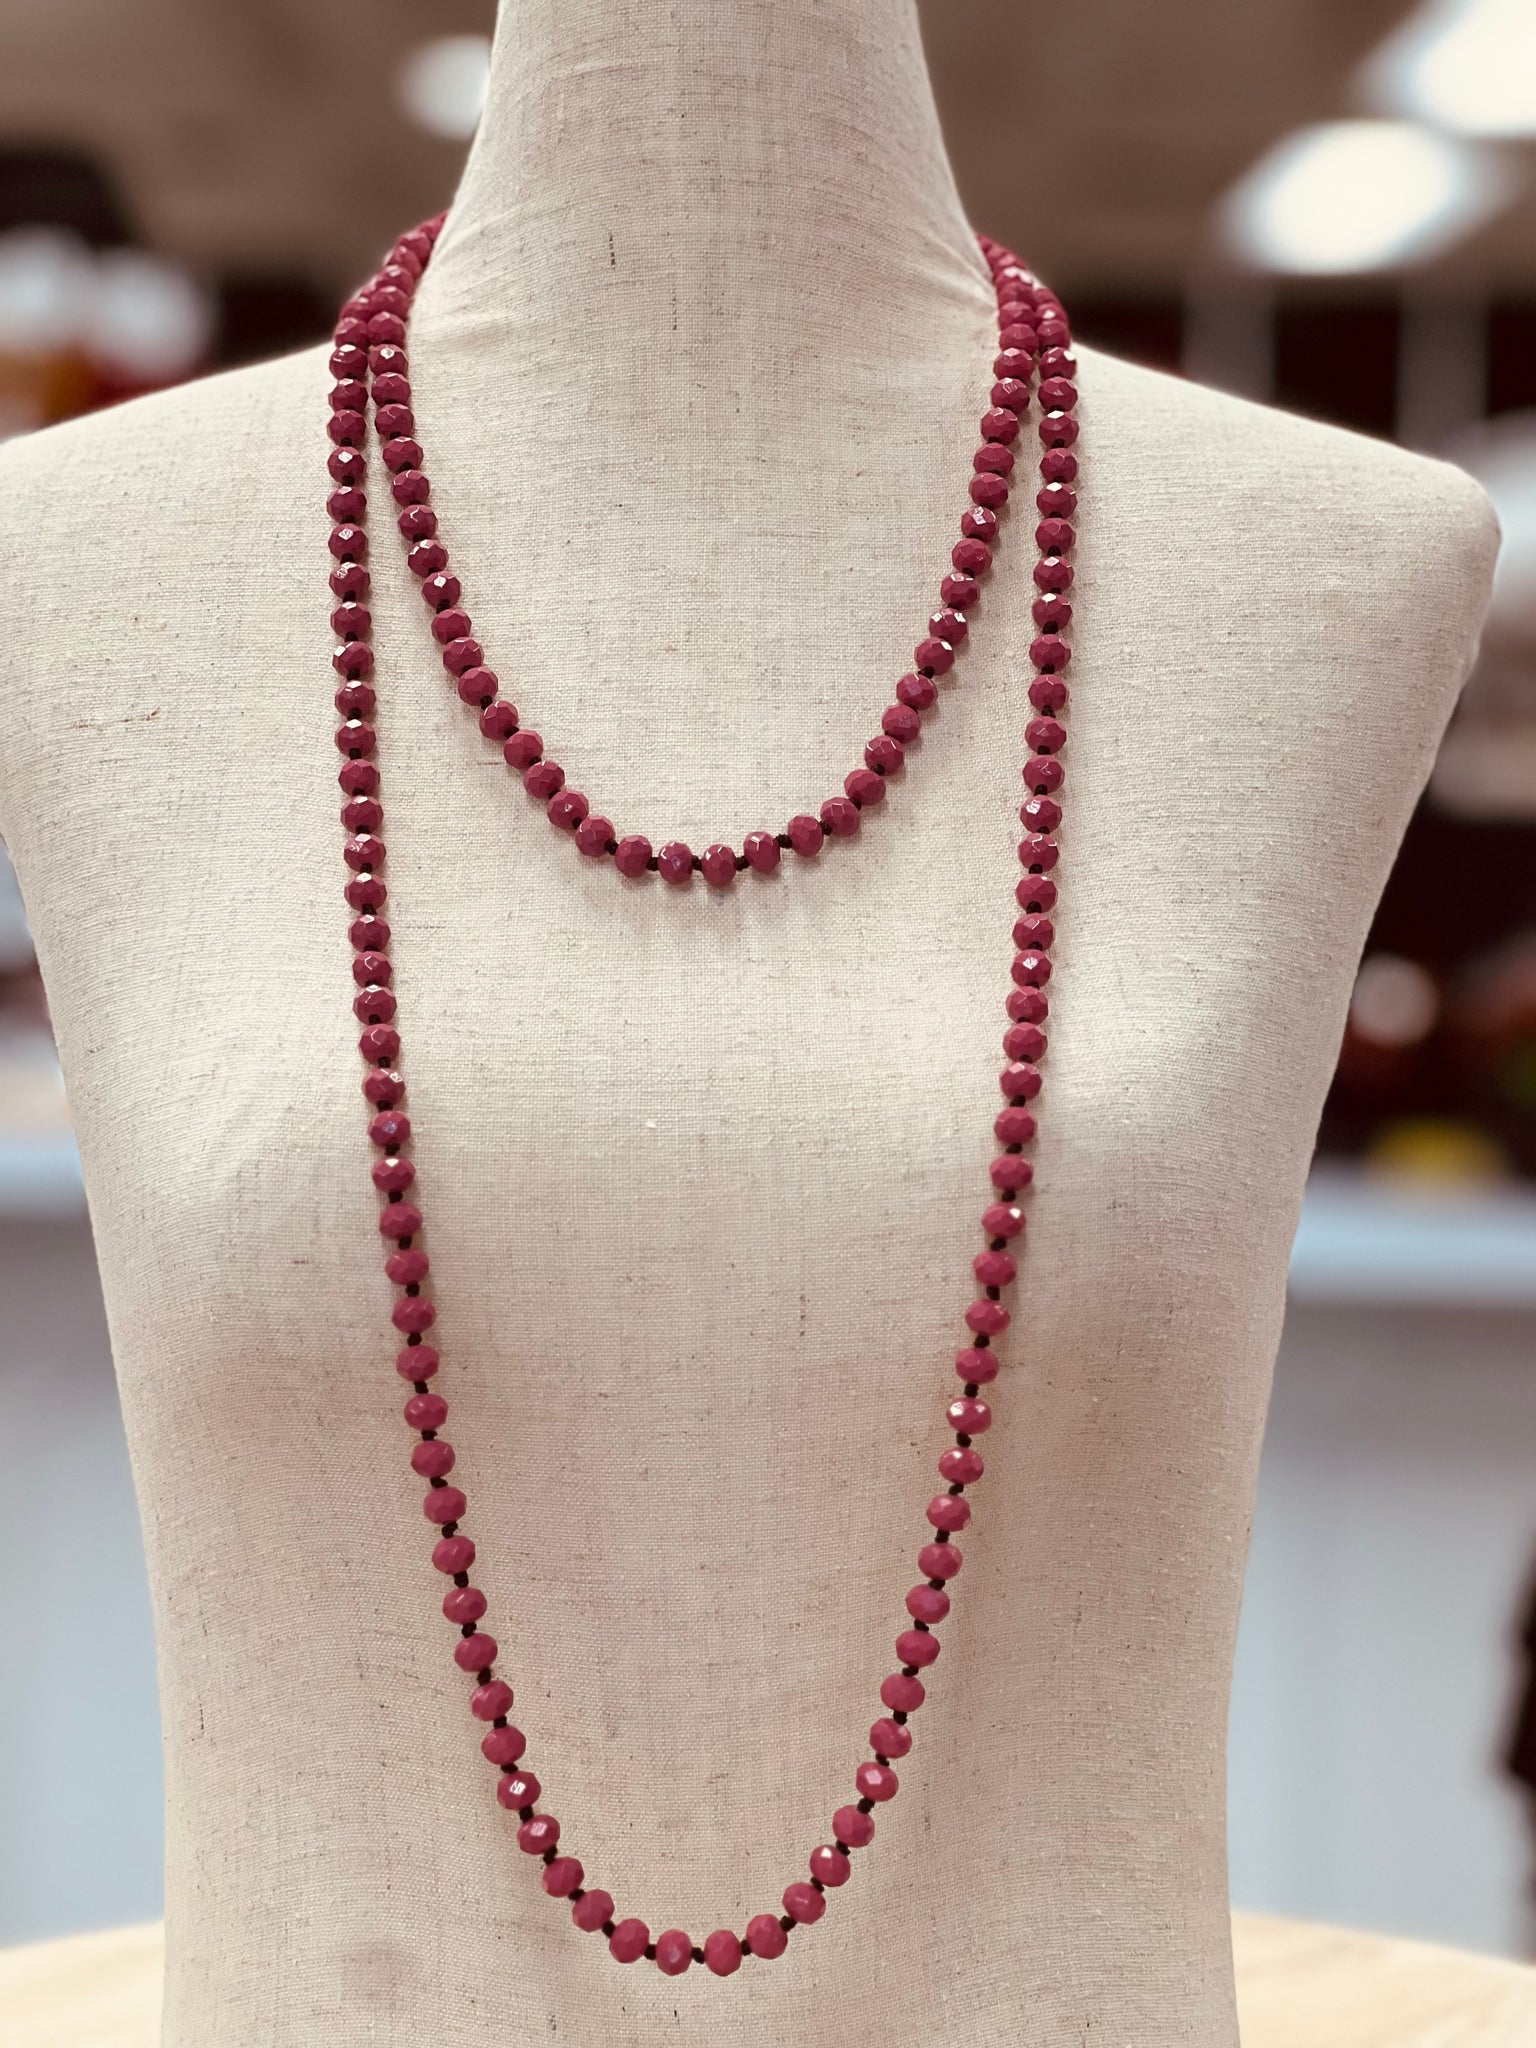 Crystal Bead Long Necklace